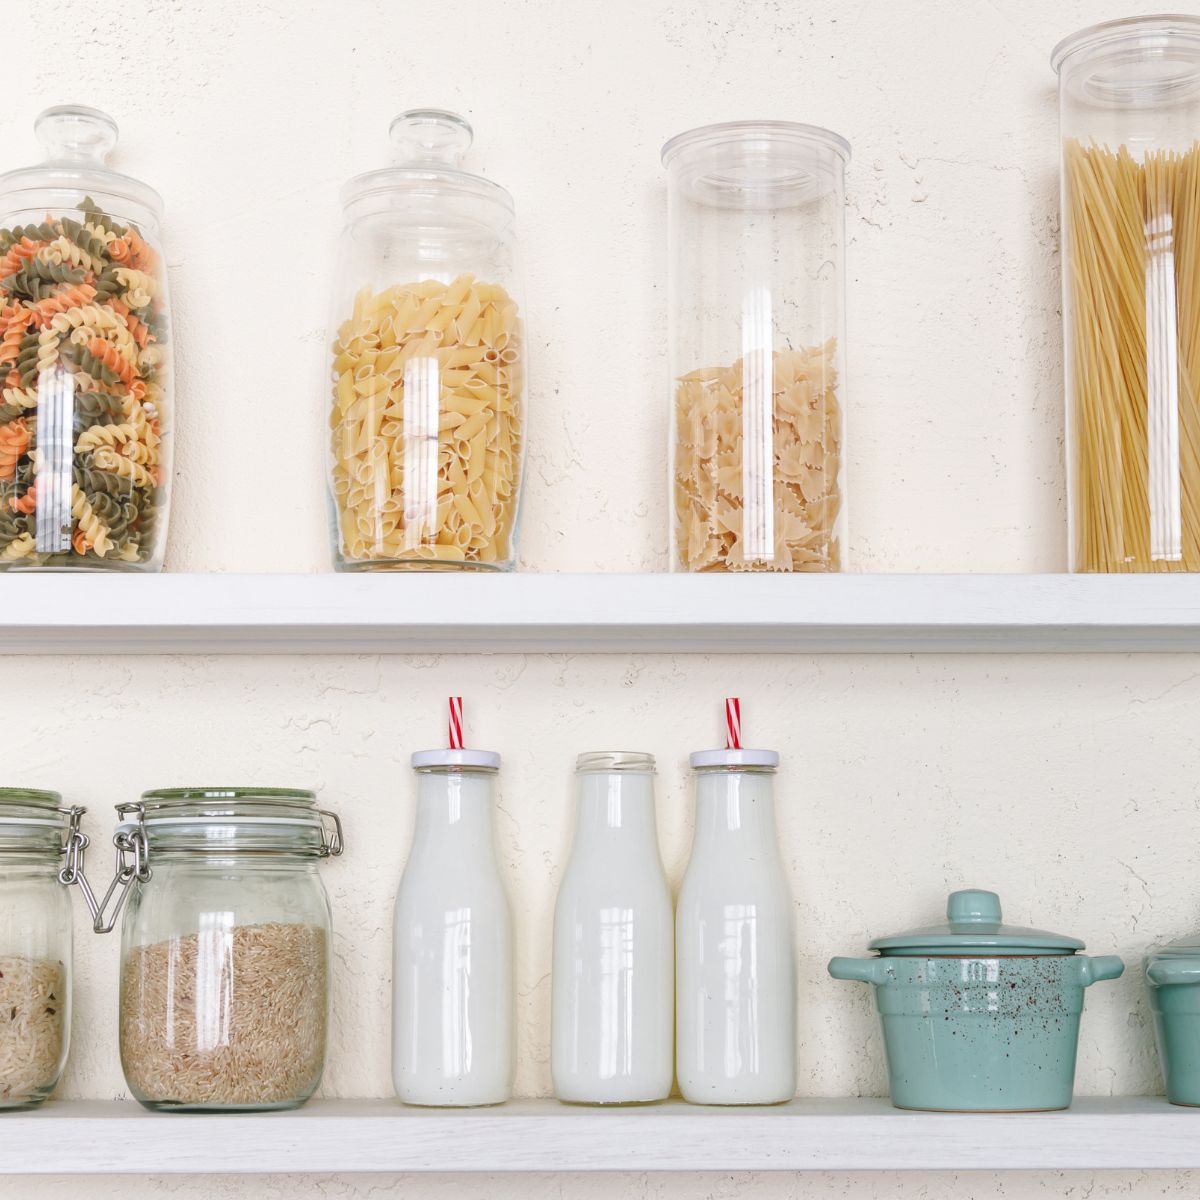 8 Ways to Organize Your Pantry Like a Pro